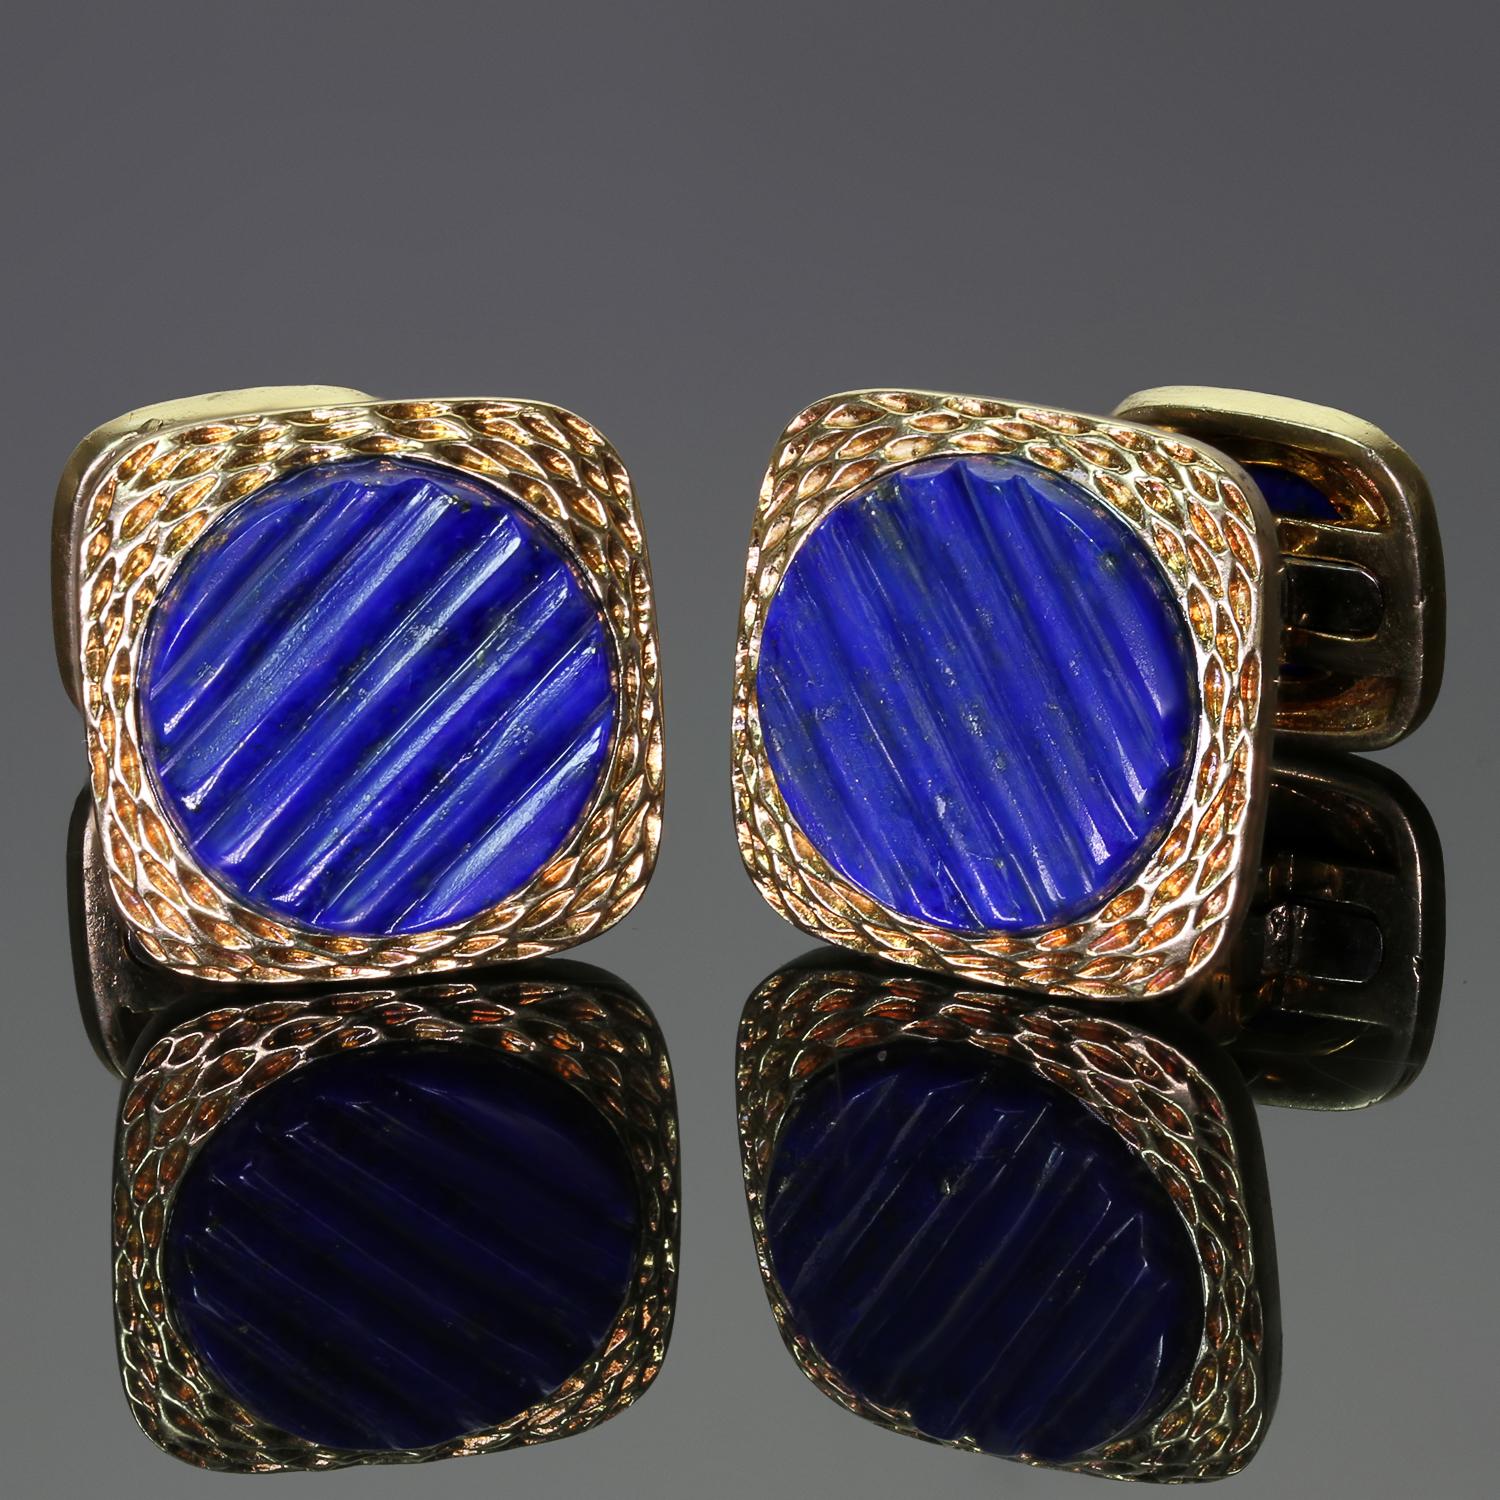 These elegant vintage Van Cleef & Arpels cufflinks feature a textured square design made in 18k yellow gold and set with ridged round lapis lazuli. Made in France circa 1970s. Measurements: 0.51